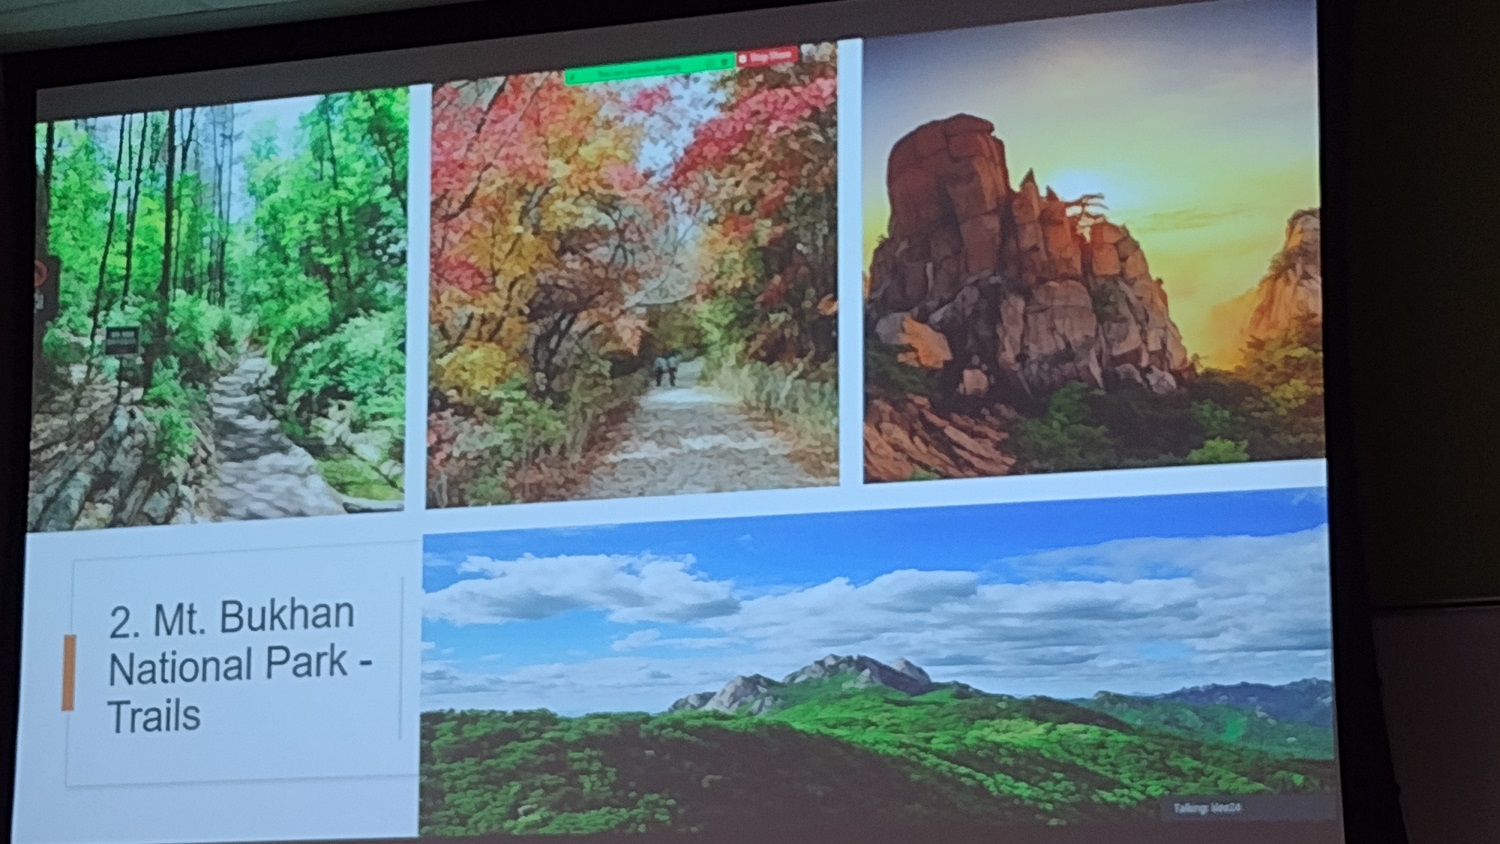 National Park Presentation - September Seminar Features Jee In Yoon, Visiting Scholar from South Korea - Parks, Recreation and Tourism Management at NC State University